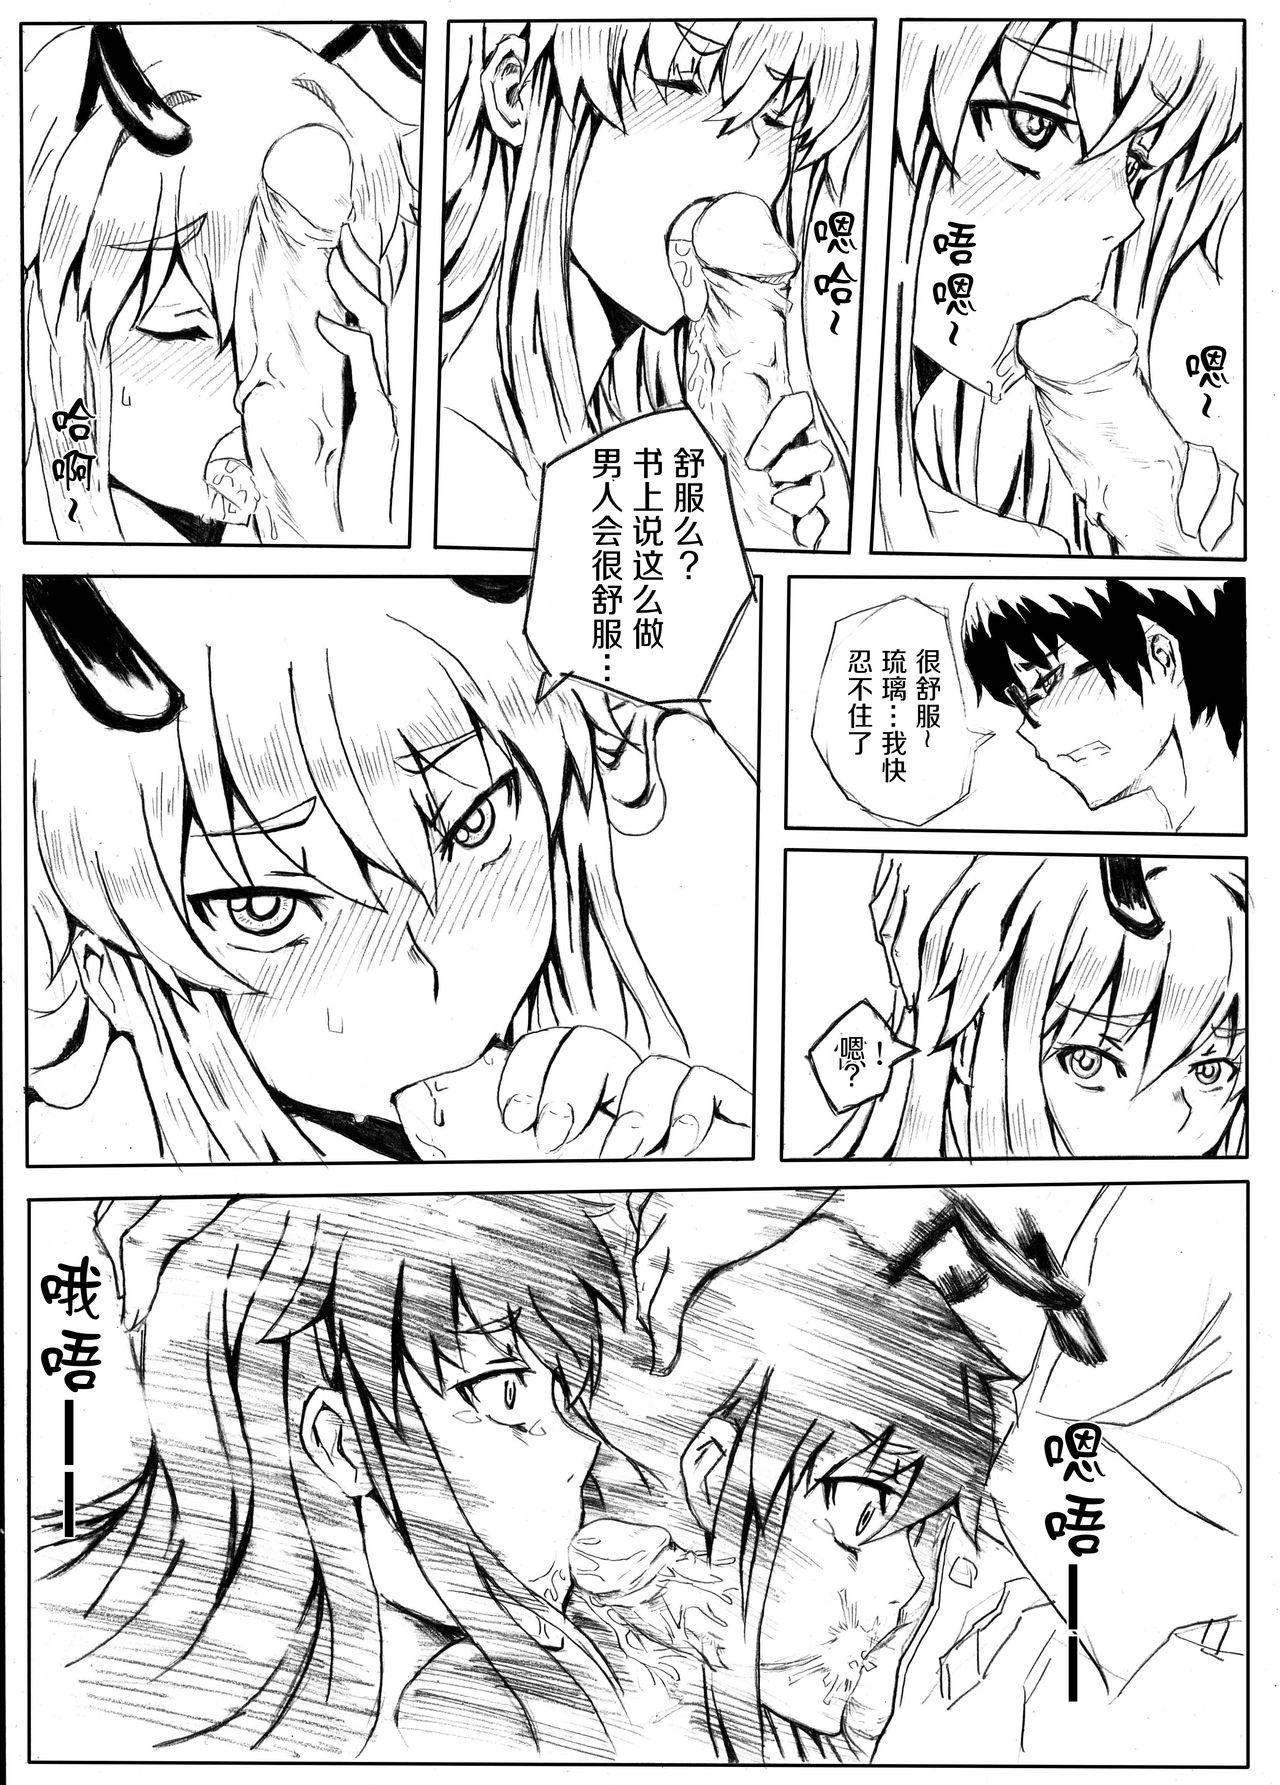 Hardcore Fuck [Shuseikan(Chinese Animation-School Shock)] Don`t Leave Me Alone 201108 [Chinese]（不想记名汉化） - School shock Office Sex - Page 10